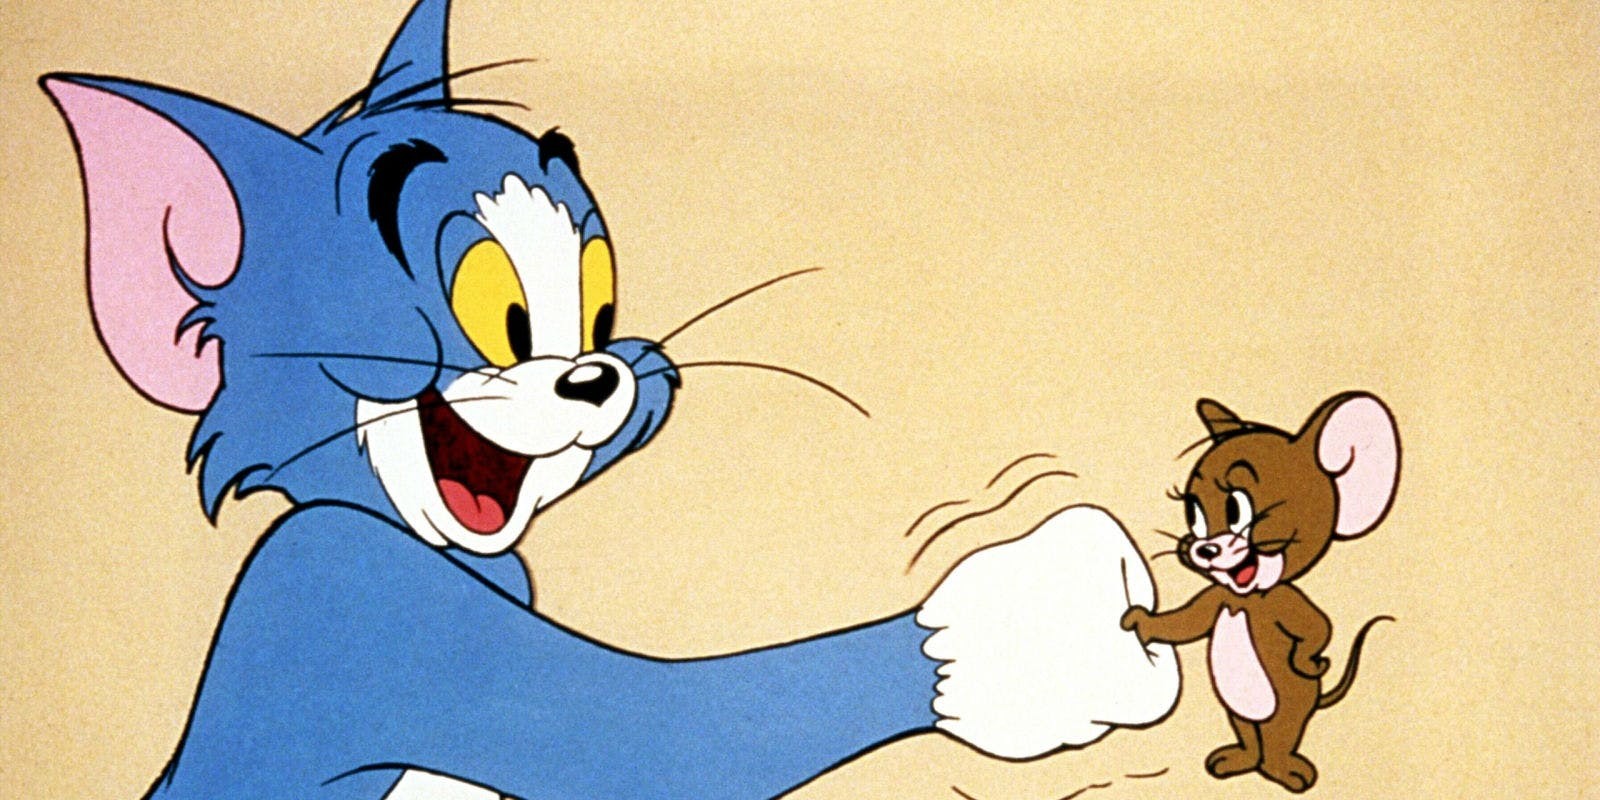 Tom and Jerry Live Action Movie